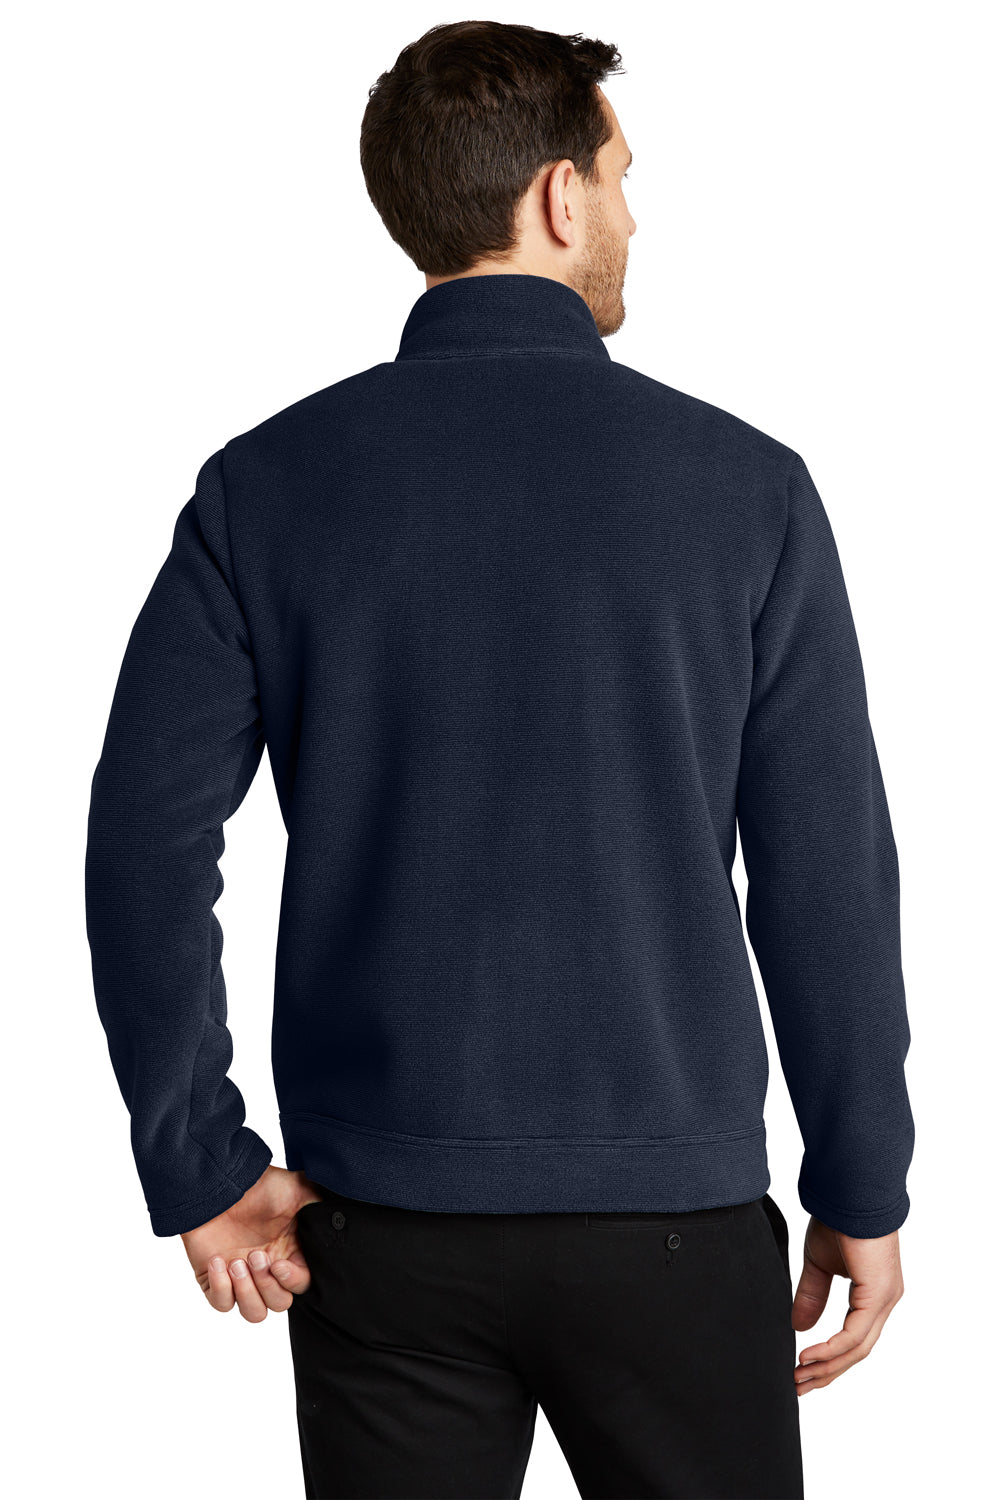 Port Authority Mens Ultra Warm Brushed Fleece Full Zip Jacket Insignia Blue/River Navy Blue Side